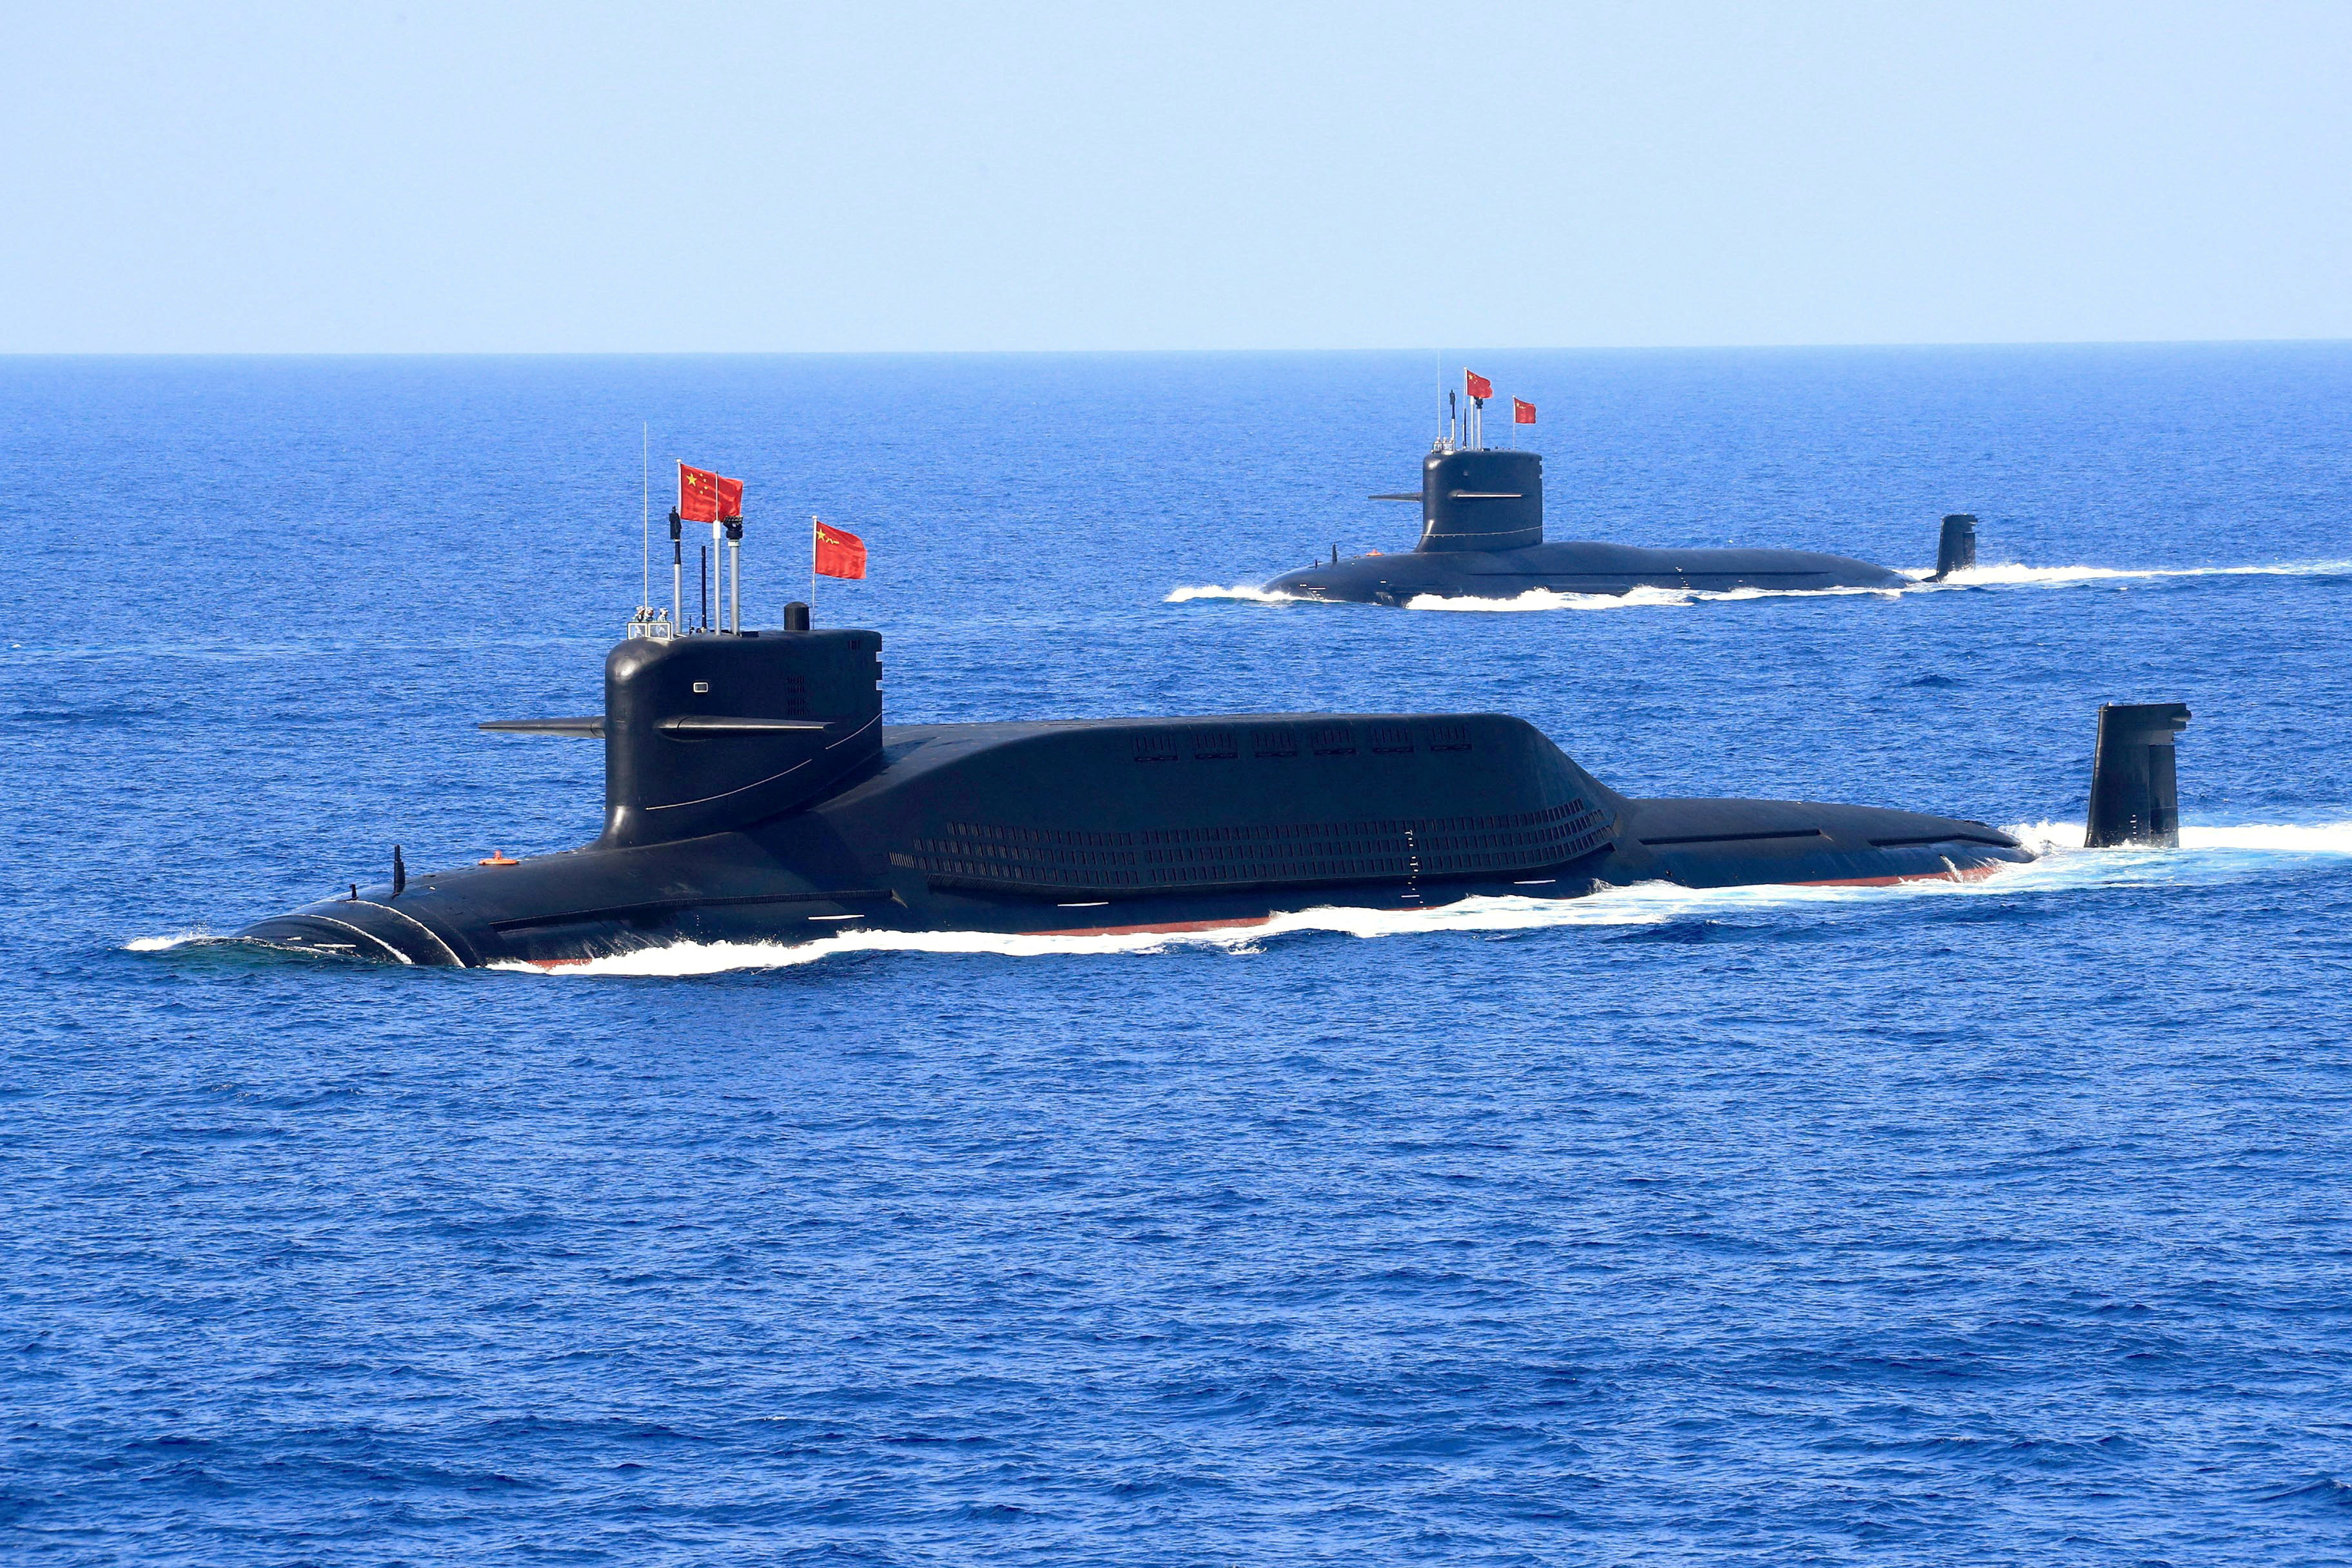 Nuclear-powered Type 094A Jin-class ballistic missile submarine of the Chinese People's Liberation Army (PLA) Navy is seen during a military display in the South China Sea